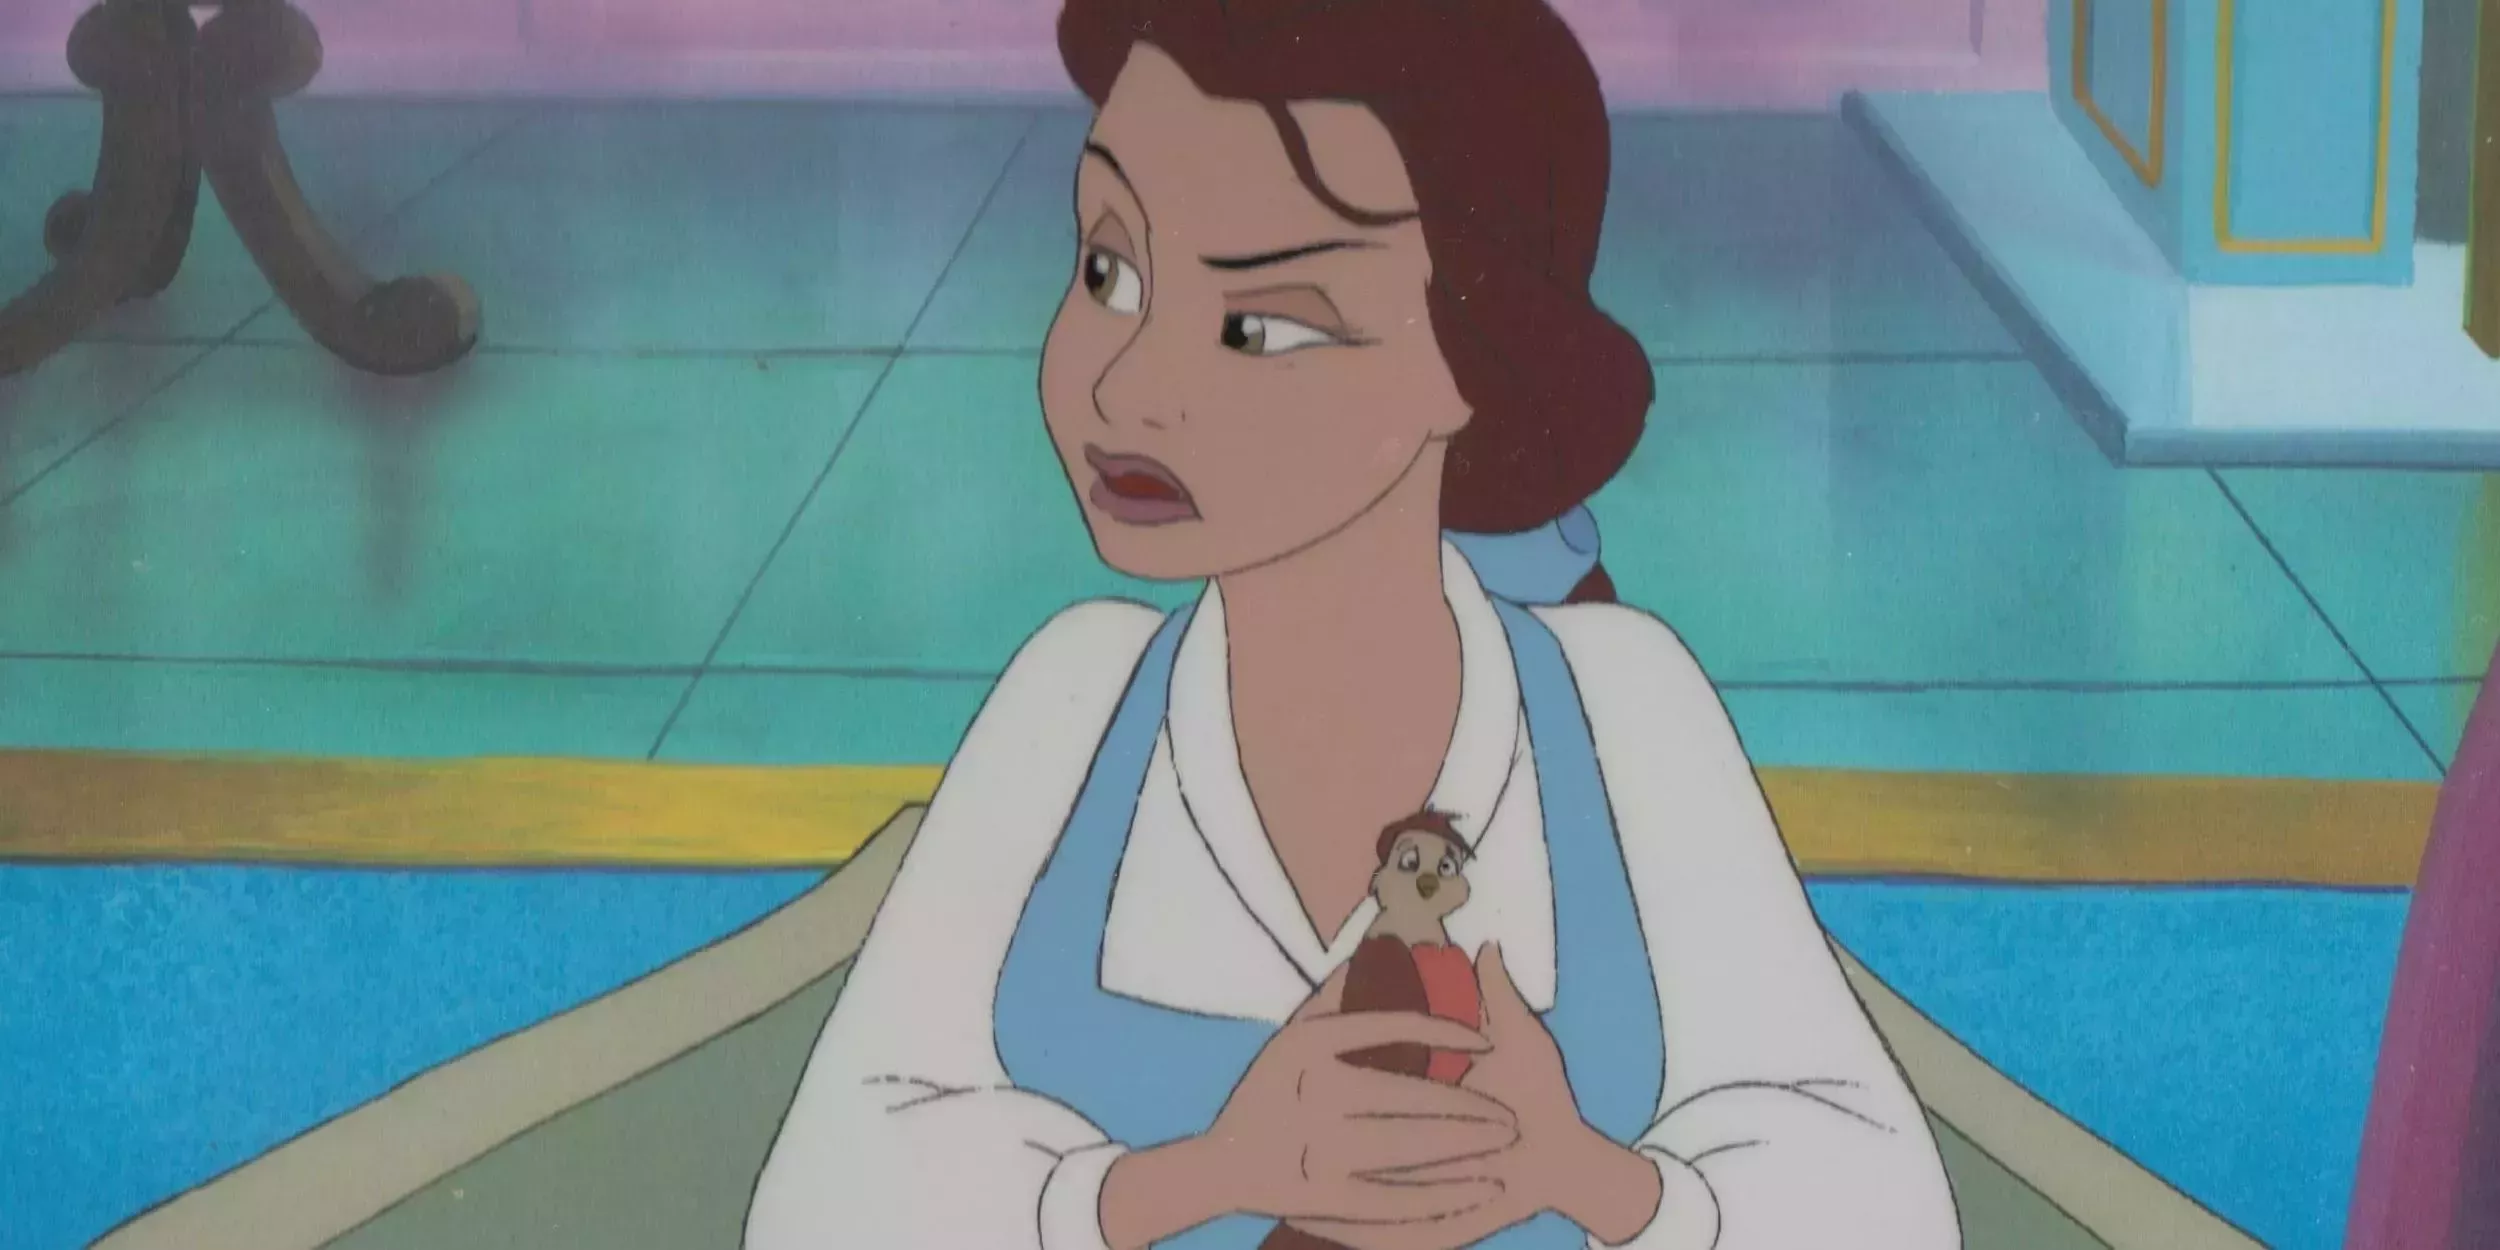 Belle holds the injured bird she found - Belle's Magical World